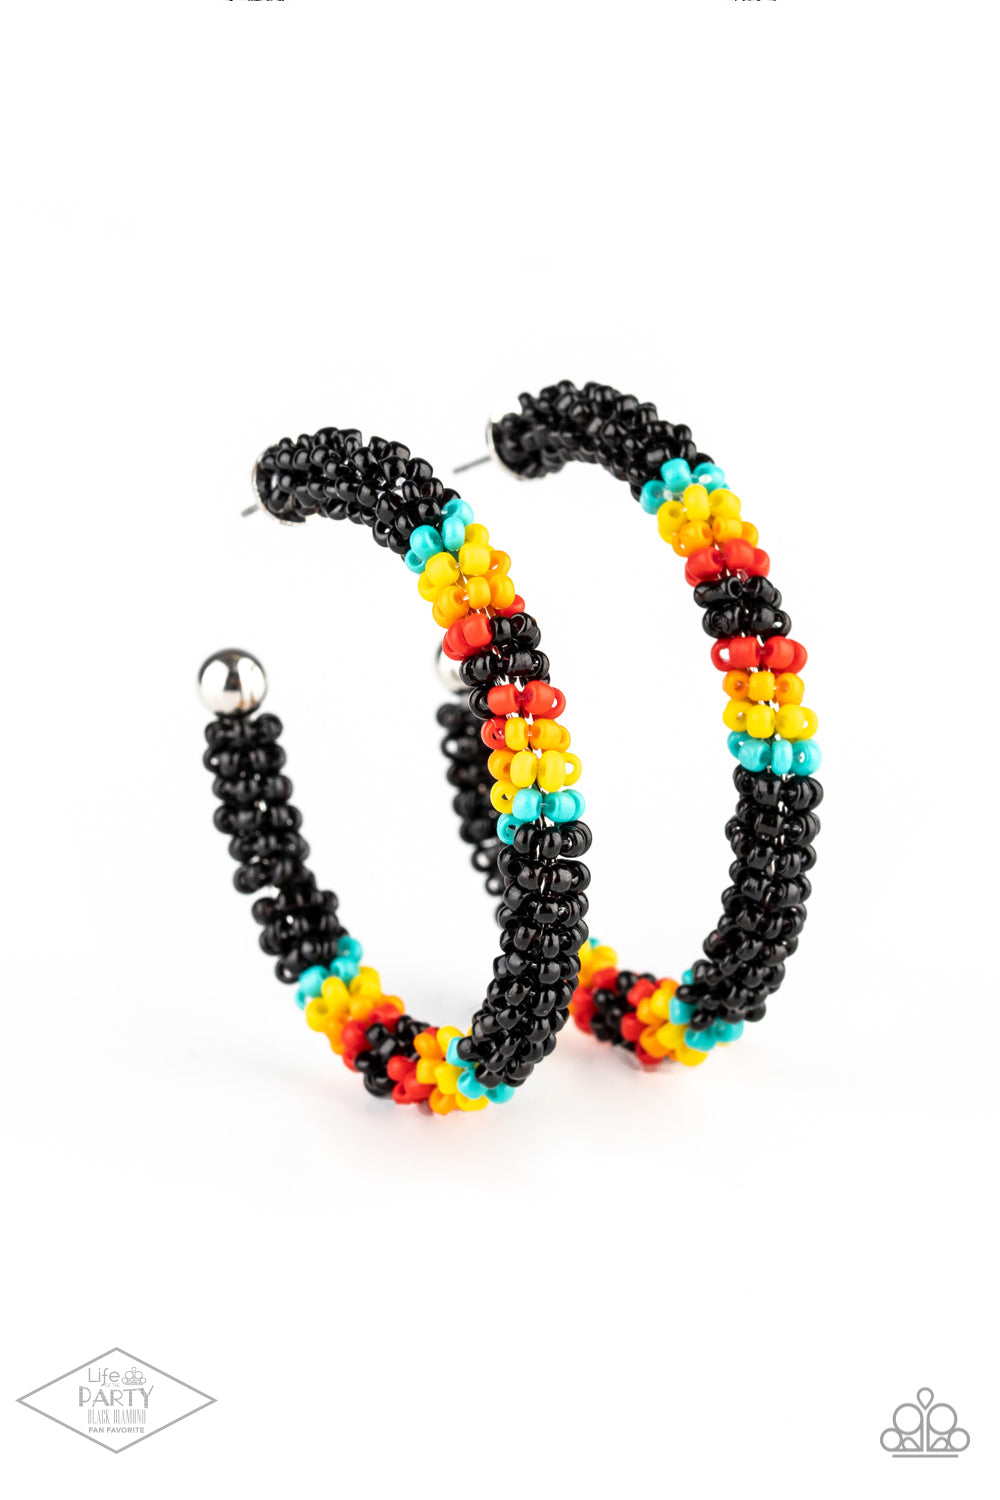 A colorful strand of black, blue, yellow, orange, and red seed beads wraps around a shiny silver hoop, creating a colorfully seasonal look. Earring attaches to a standard post fitting. Hoop measures approximately 2" in diameter.